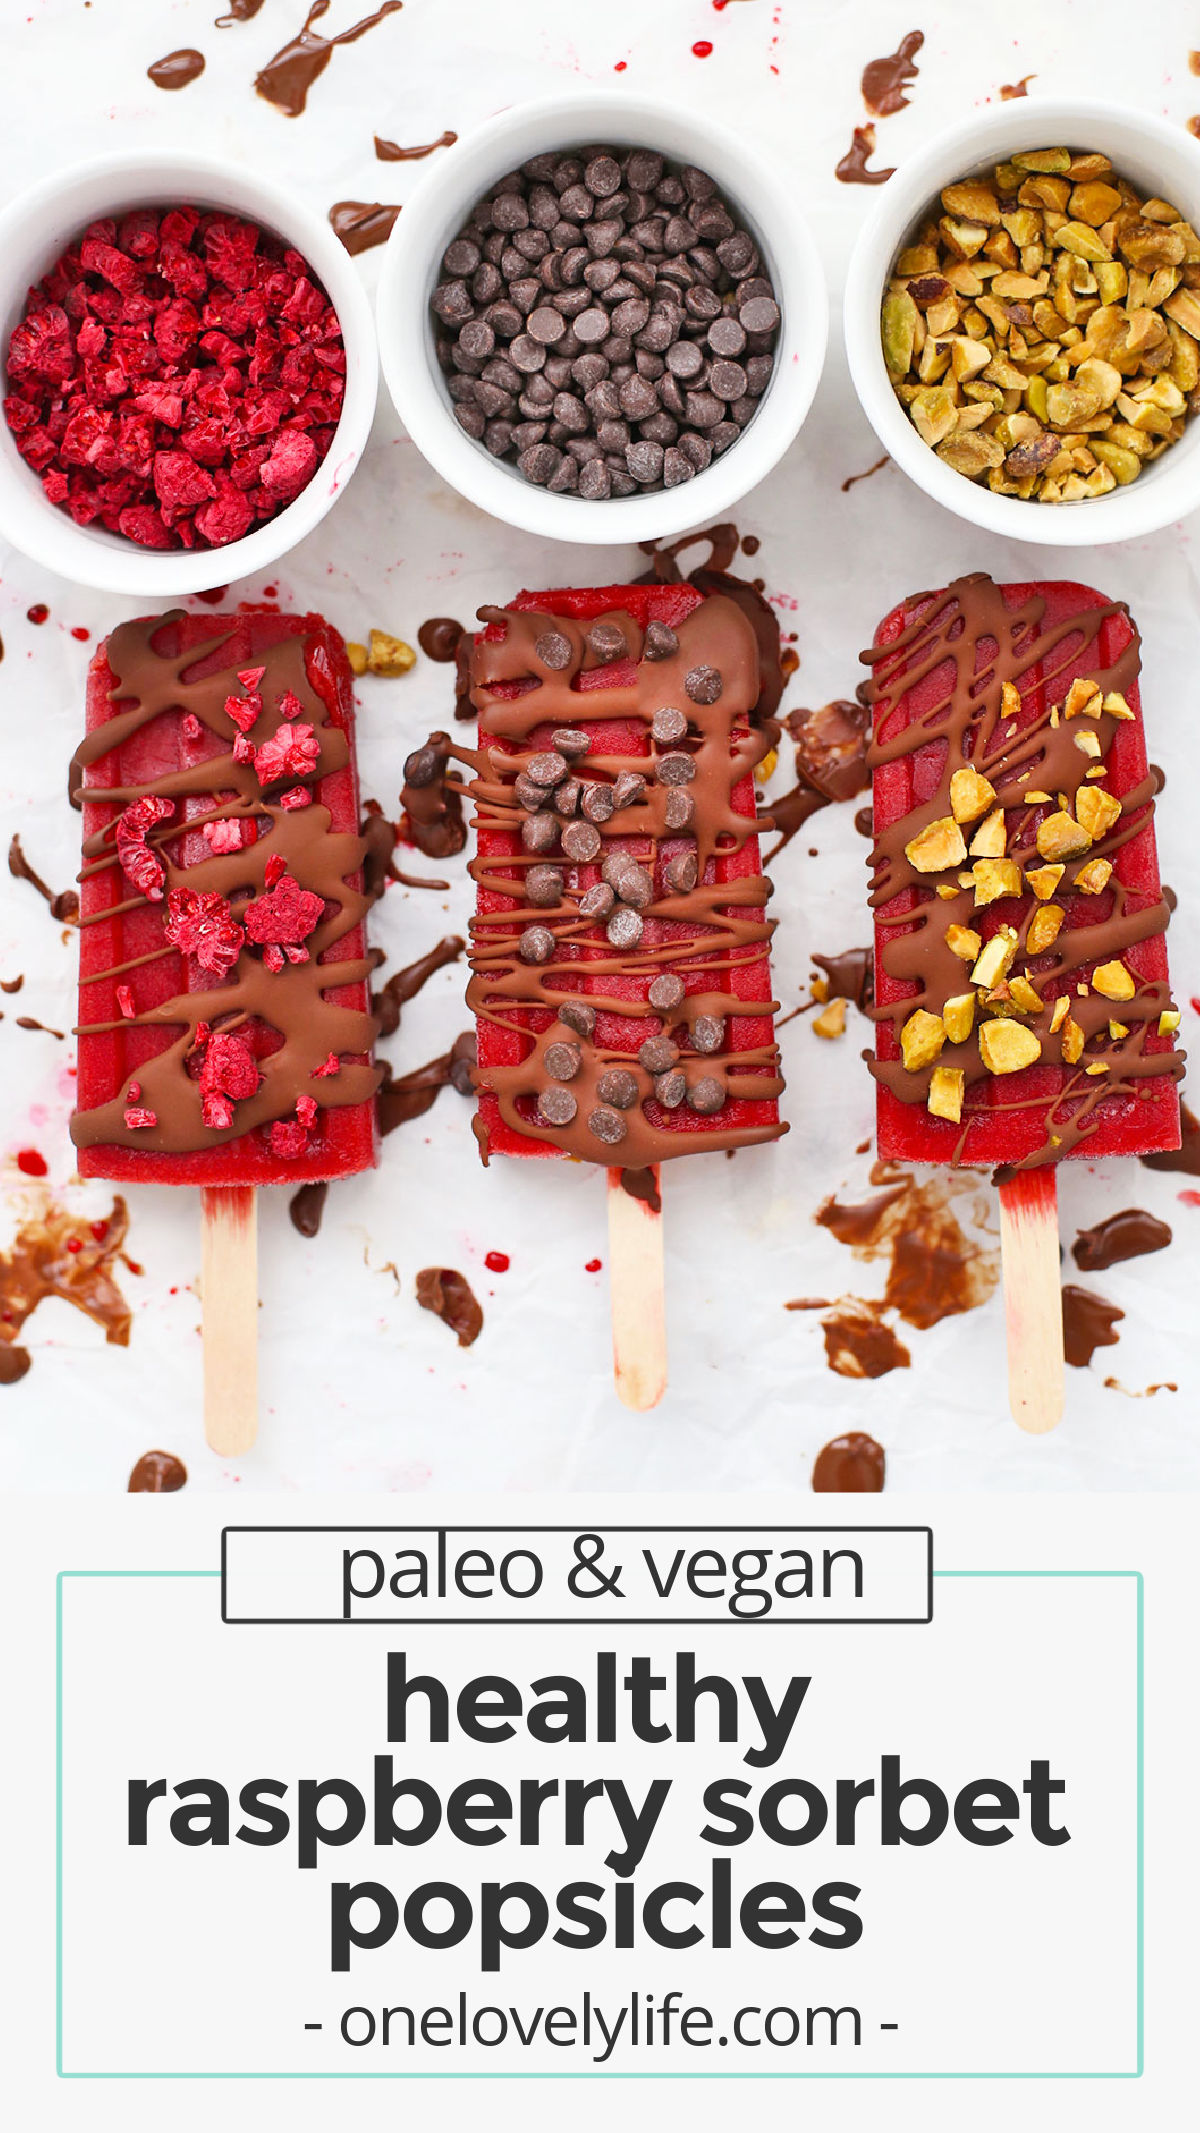 Healthy Raspberry Sorbet Popsicles - These raspberry popsicles taste like a scoop of sorbet. Don't skip the chocolate drizzle! (Paleo, Vegan) // Raspberry Popsicle recipe // healthy raspberry popsicles // healthy popsicles // homemade popsicles // homemade raspberry popsicles // healthy raspberry sorbet / vegan popsicles / paleo popsicles / gluten-free popsicles / vegetarian popsicles